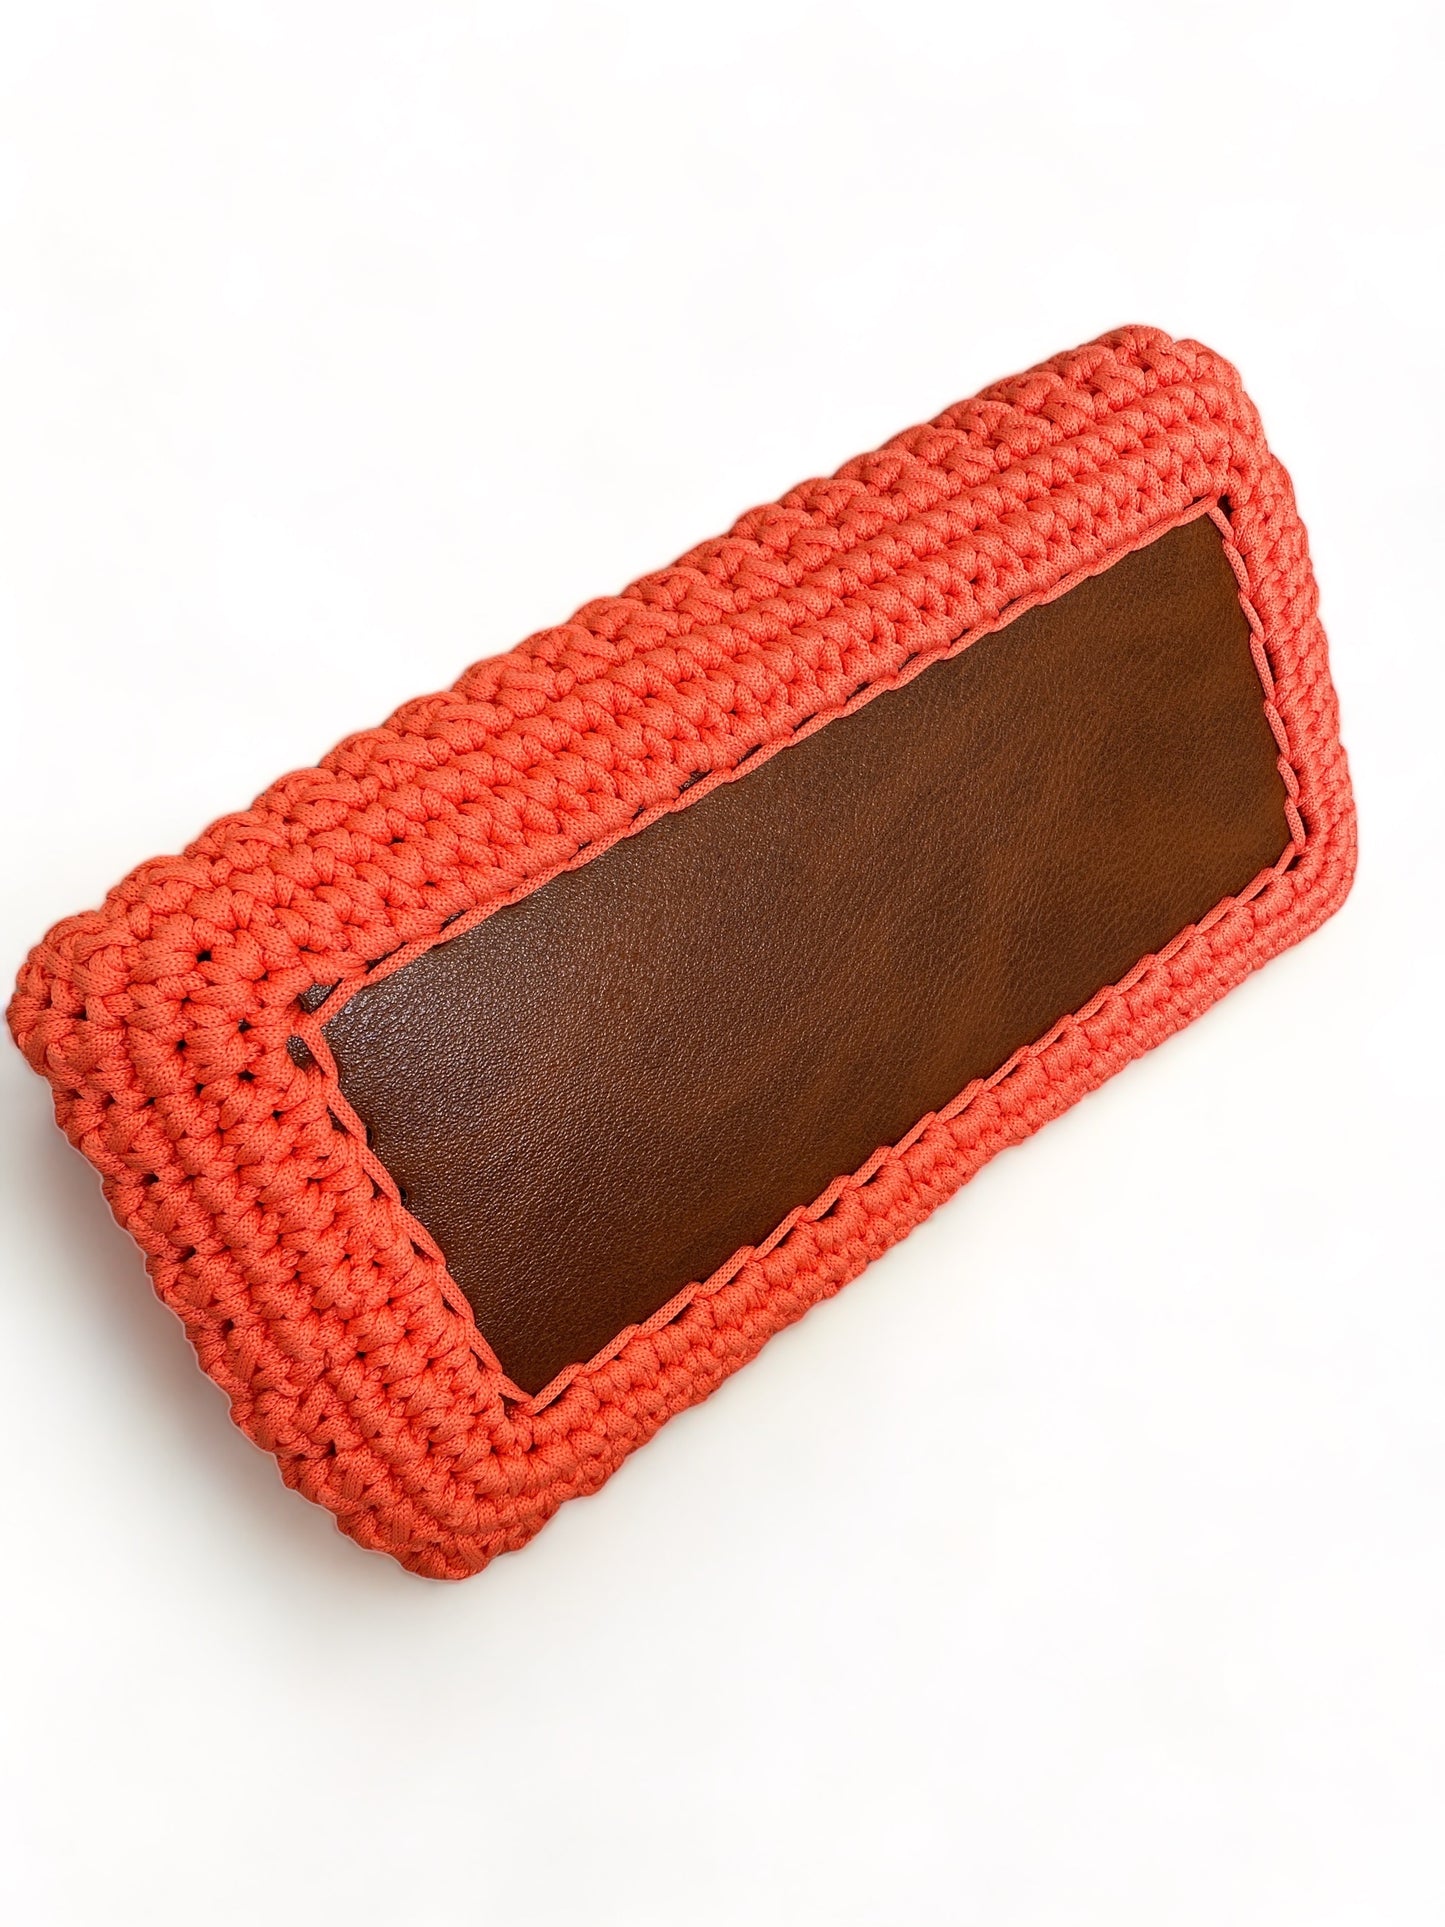 CLUTCH - your summer glam in Coral Orange colour